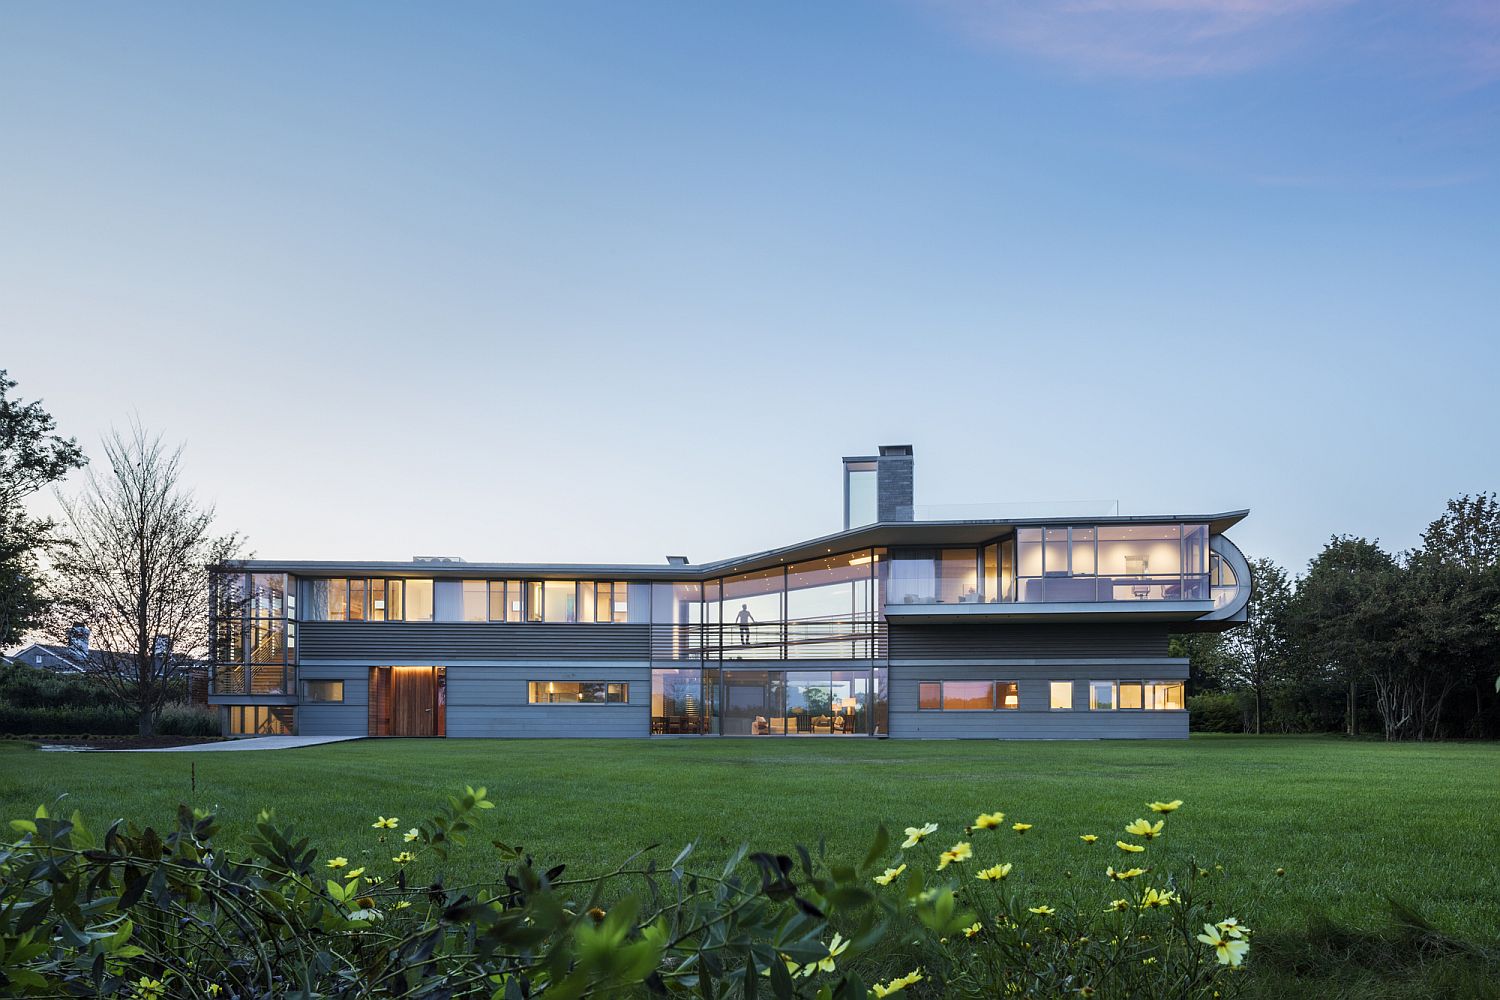 Gorgeous Hamptons Residence in Long Island with a lovely view of the landscape